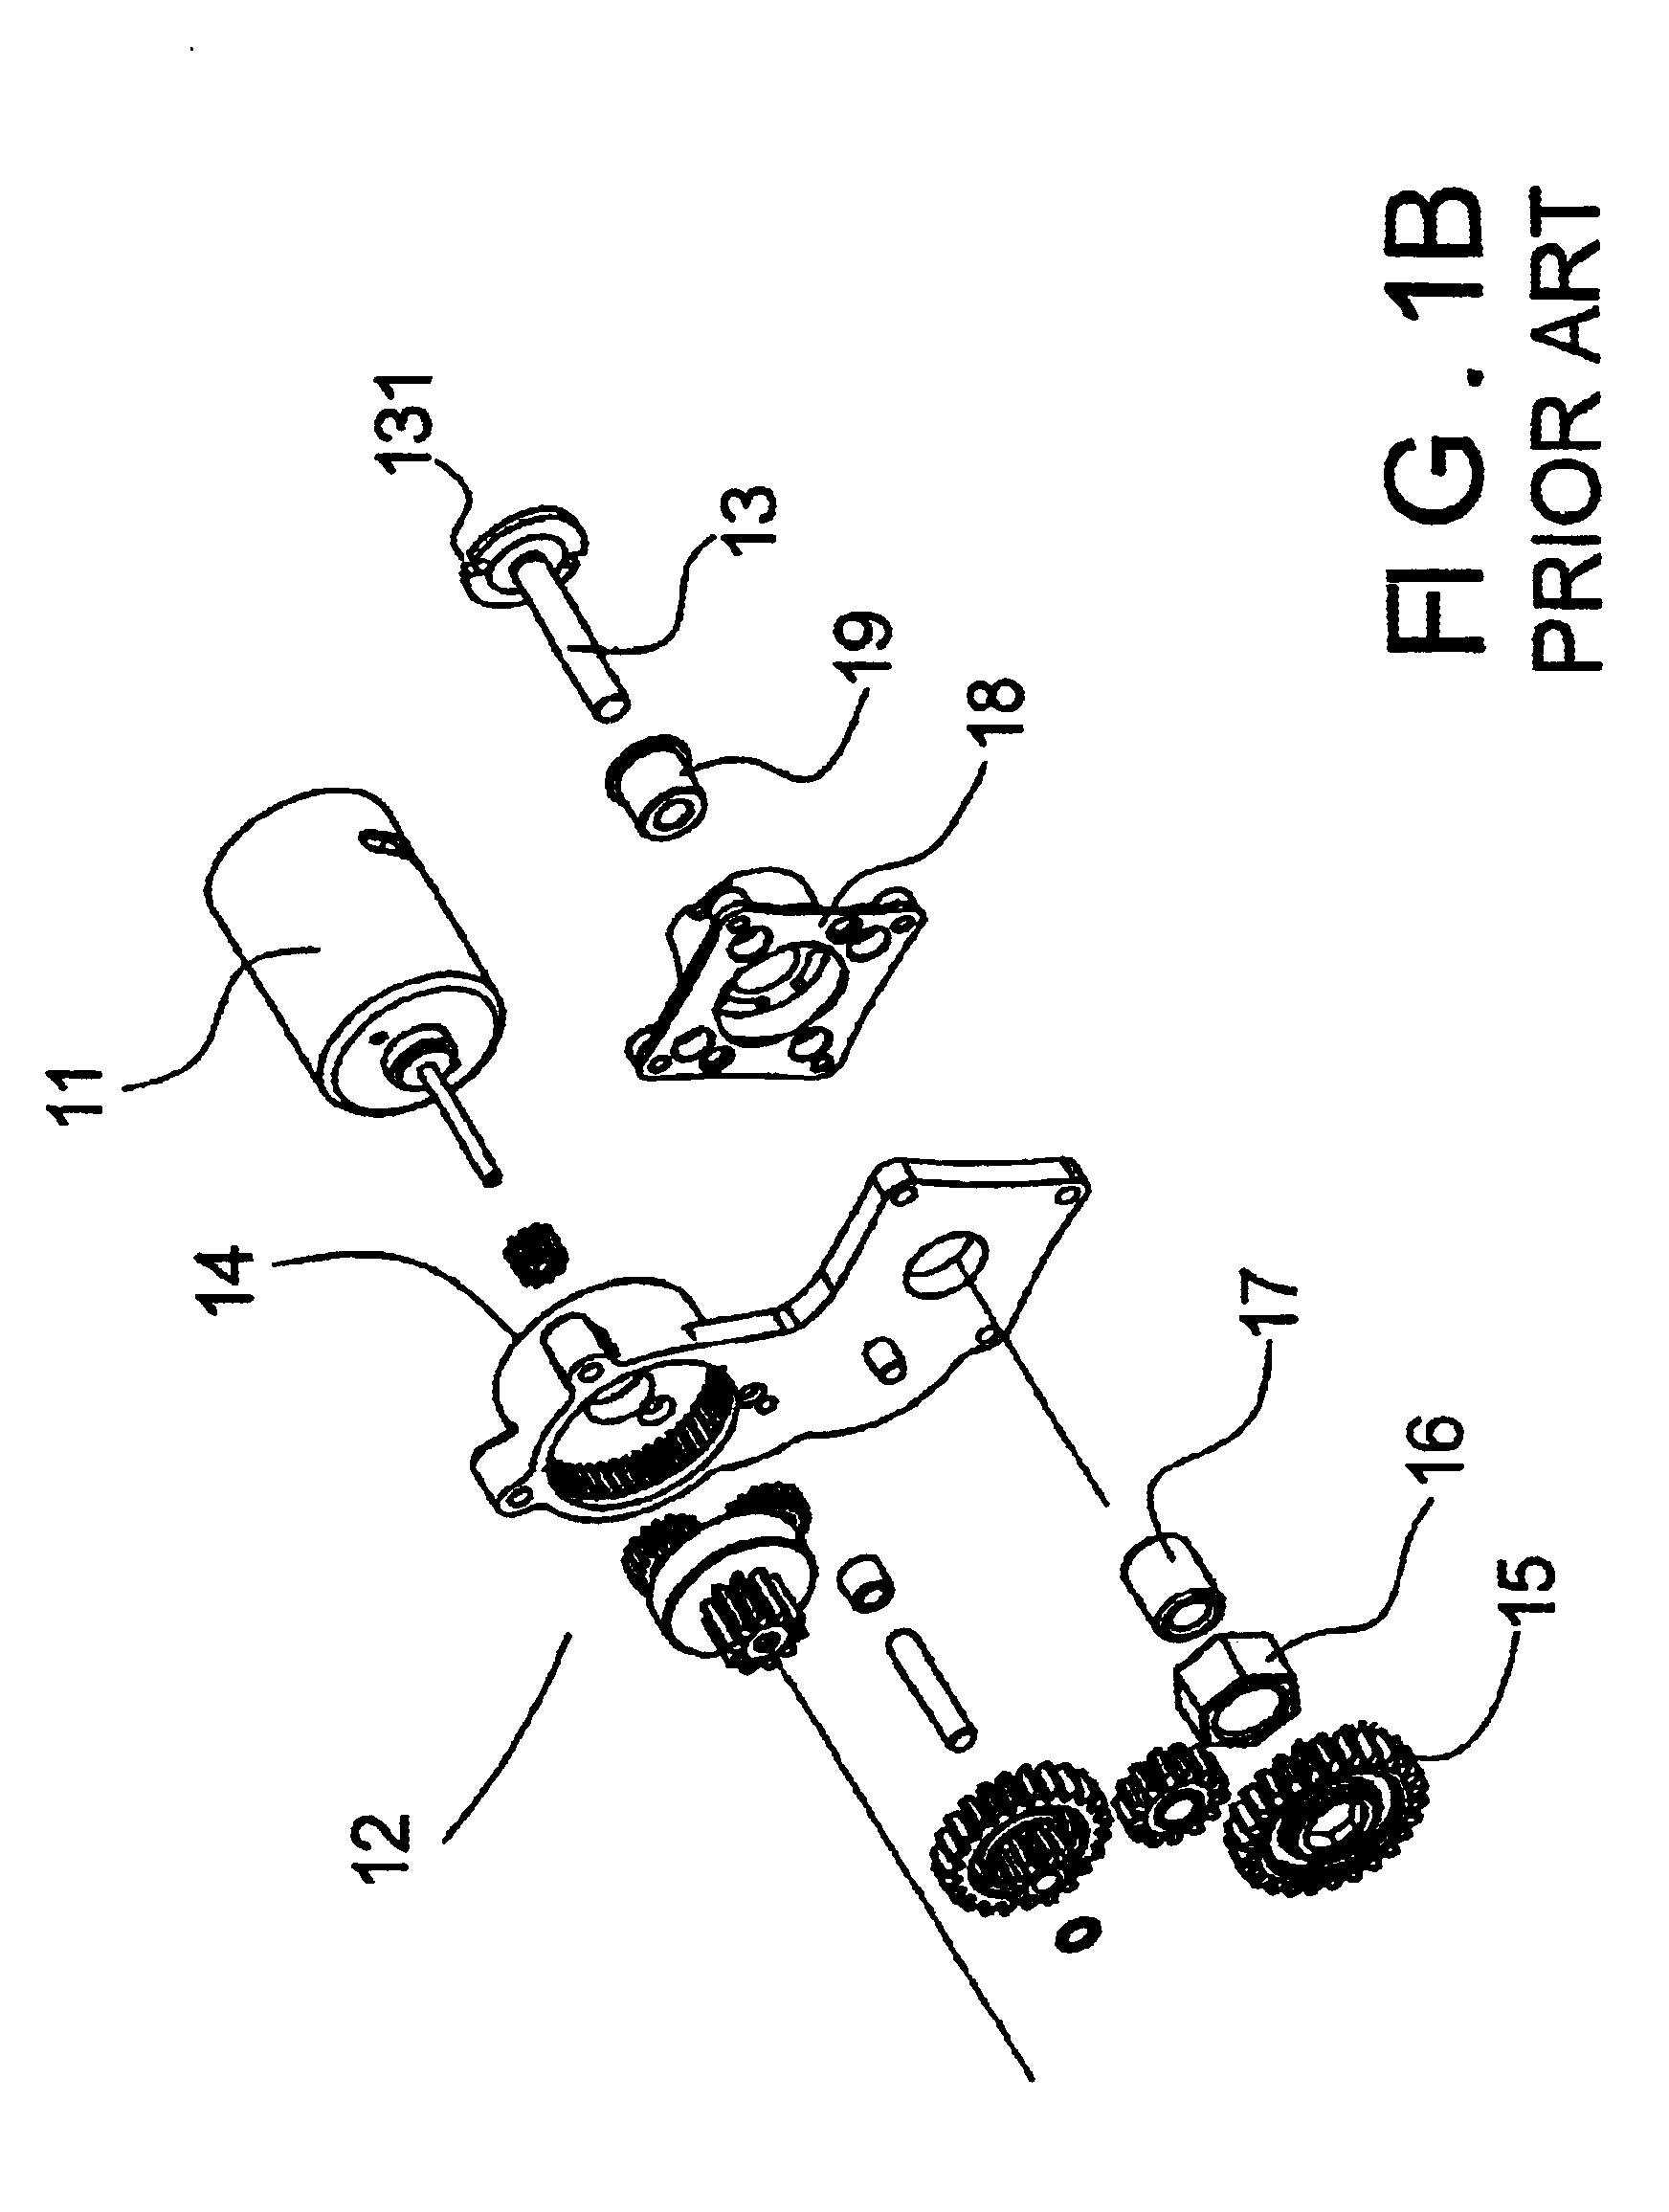 Structure of an engine starter of a remote-controlled car